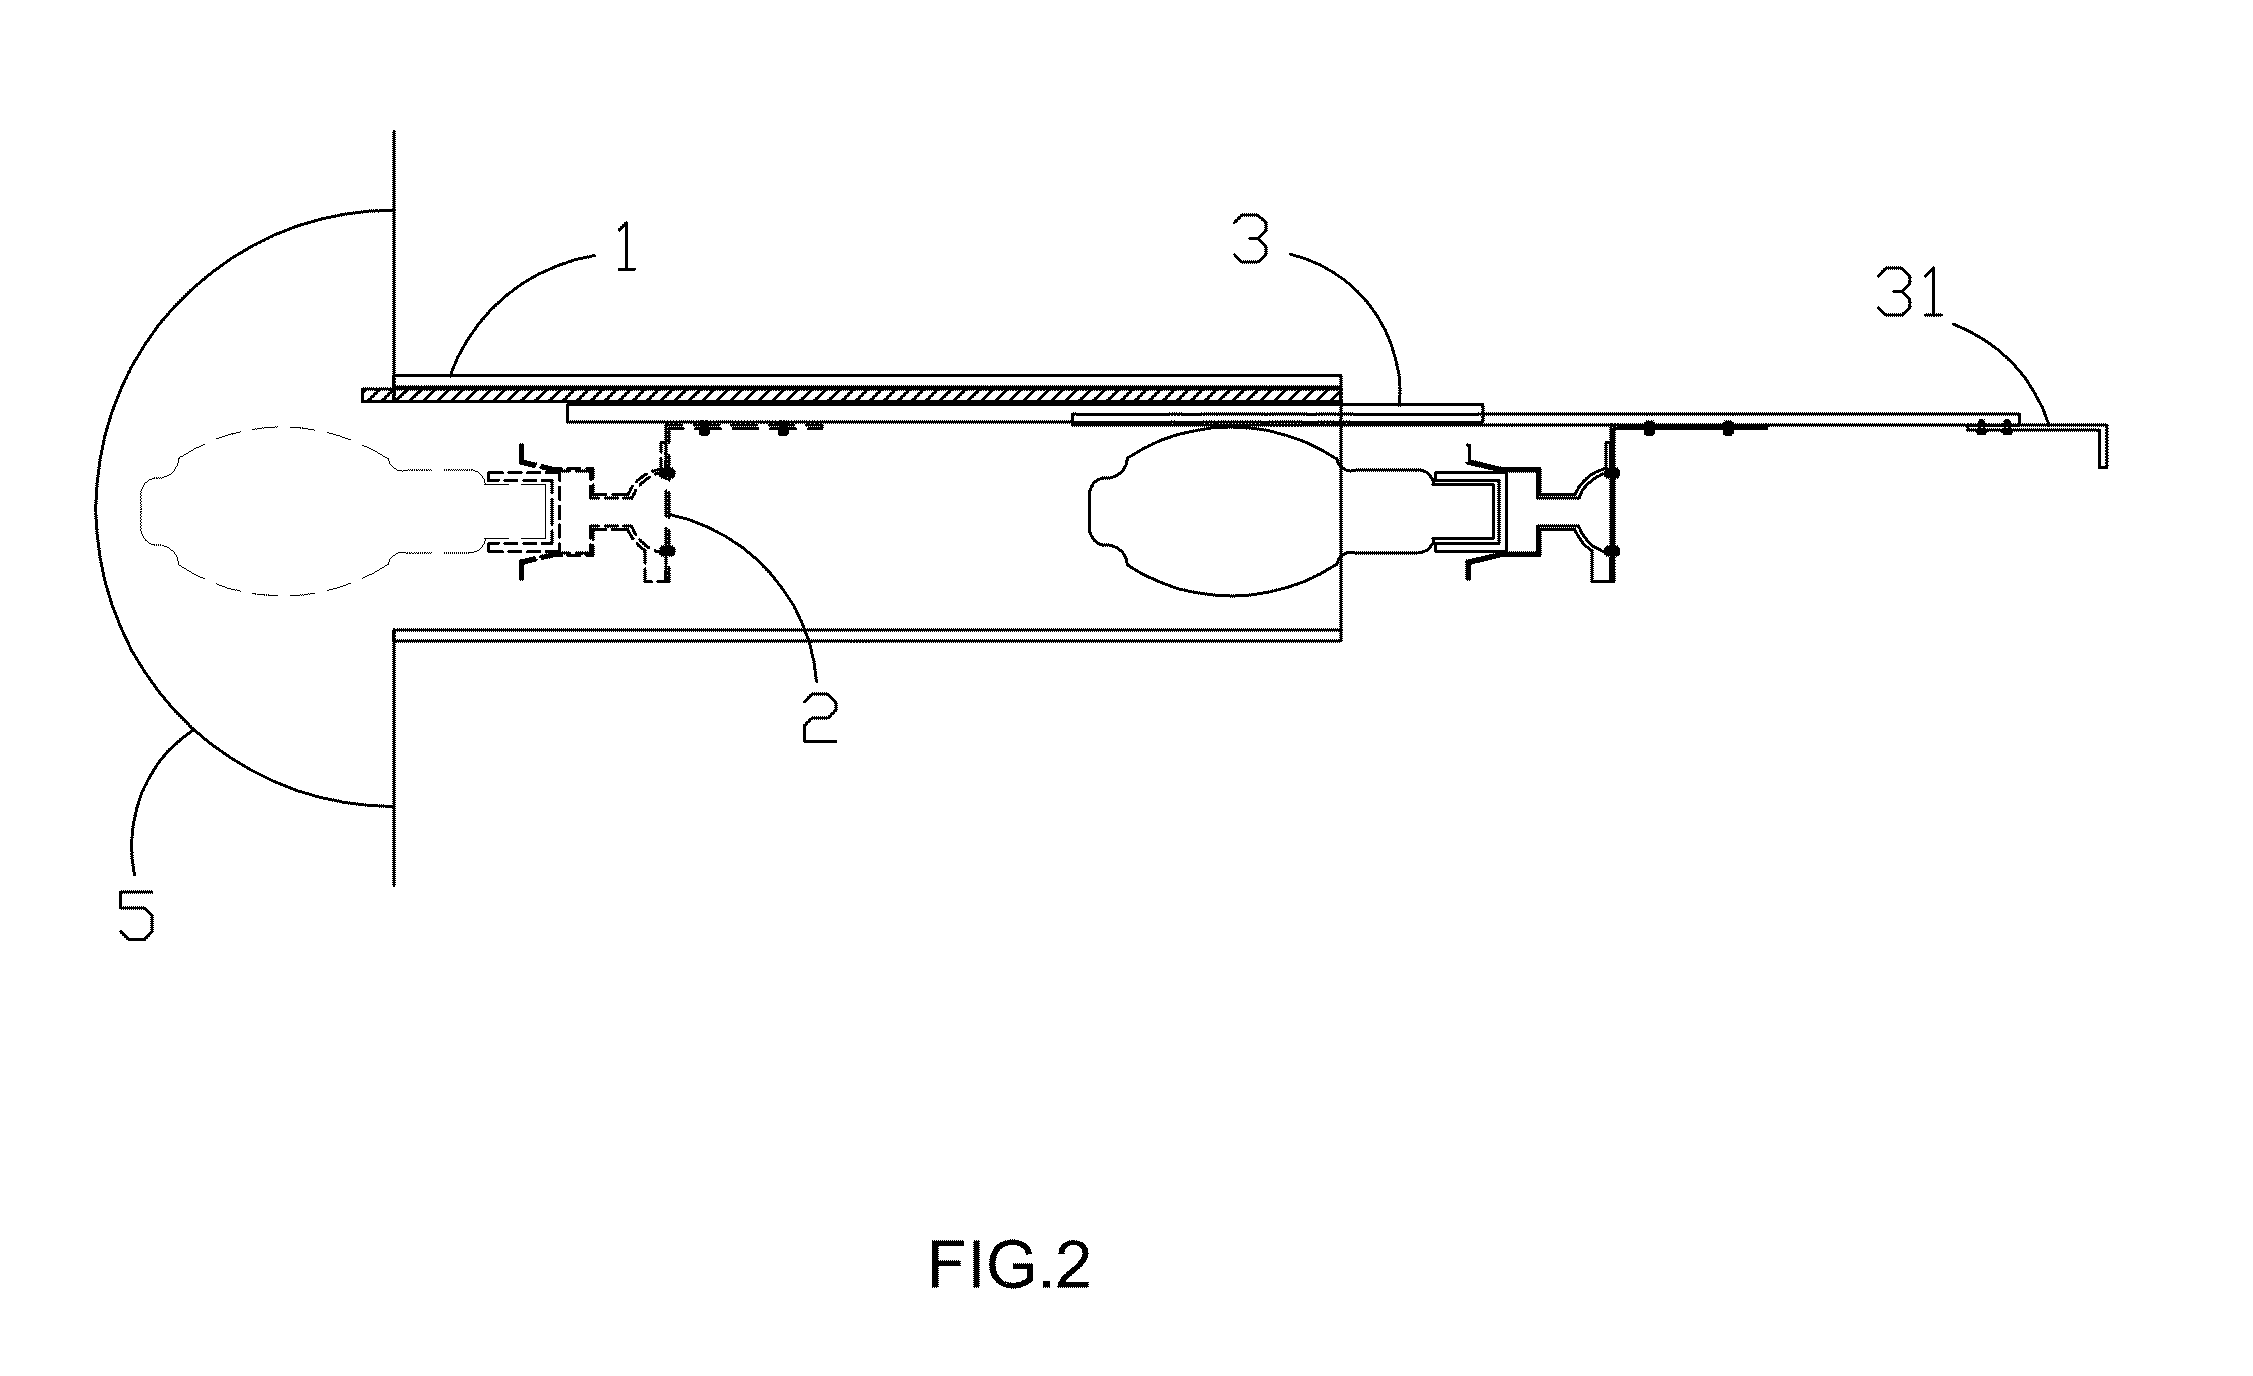 Maintenance mechanism for lighting equipment in a closed space of high radiation activity